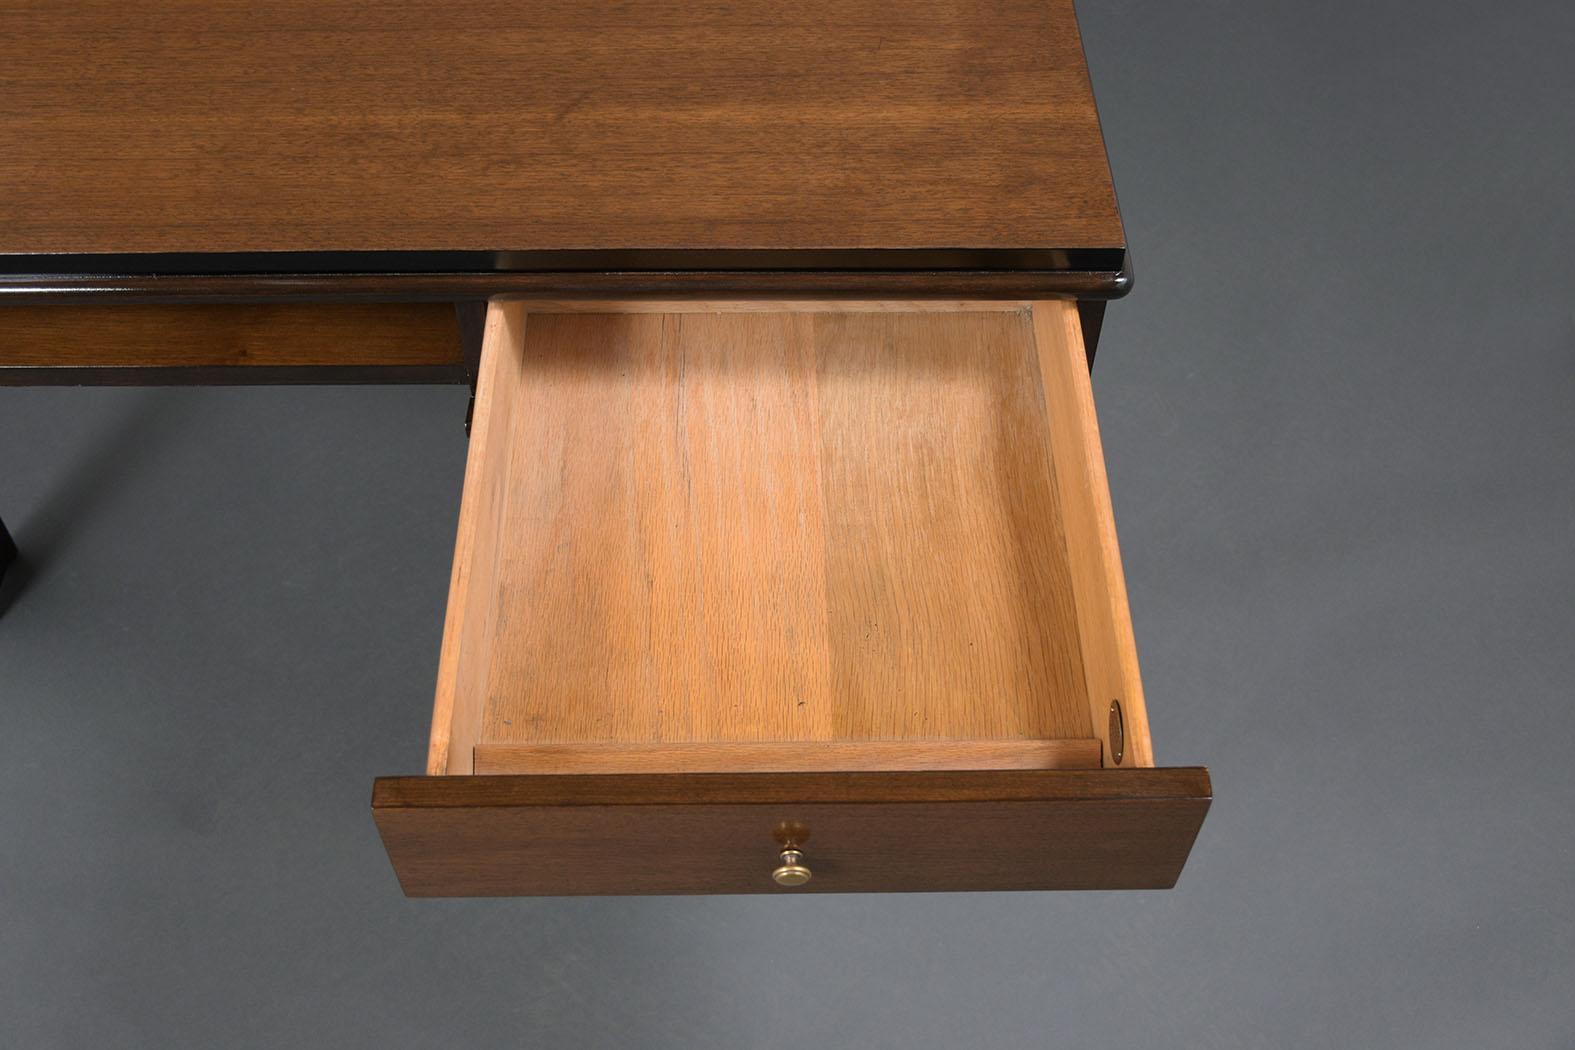 Lacquered 1950s Art Deco Pedestal Desk in Walnut & Ebonized Finish with Brass Accents For Sale